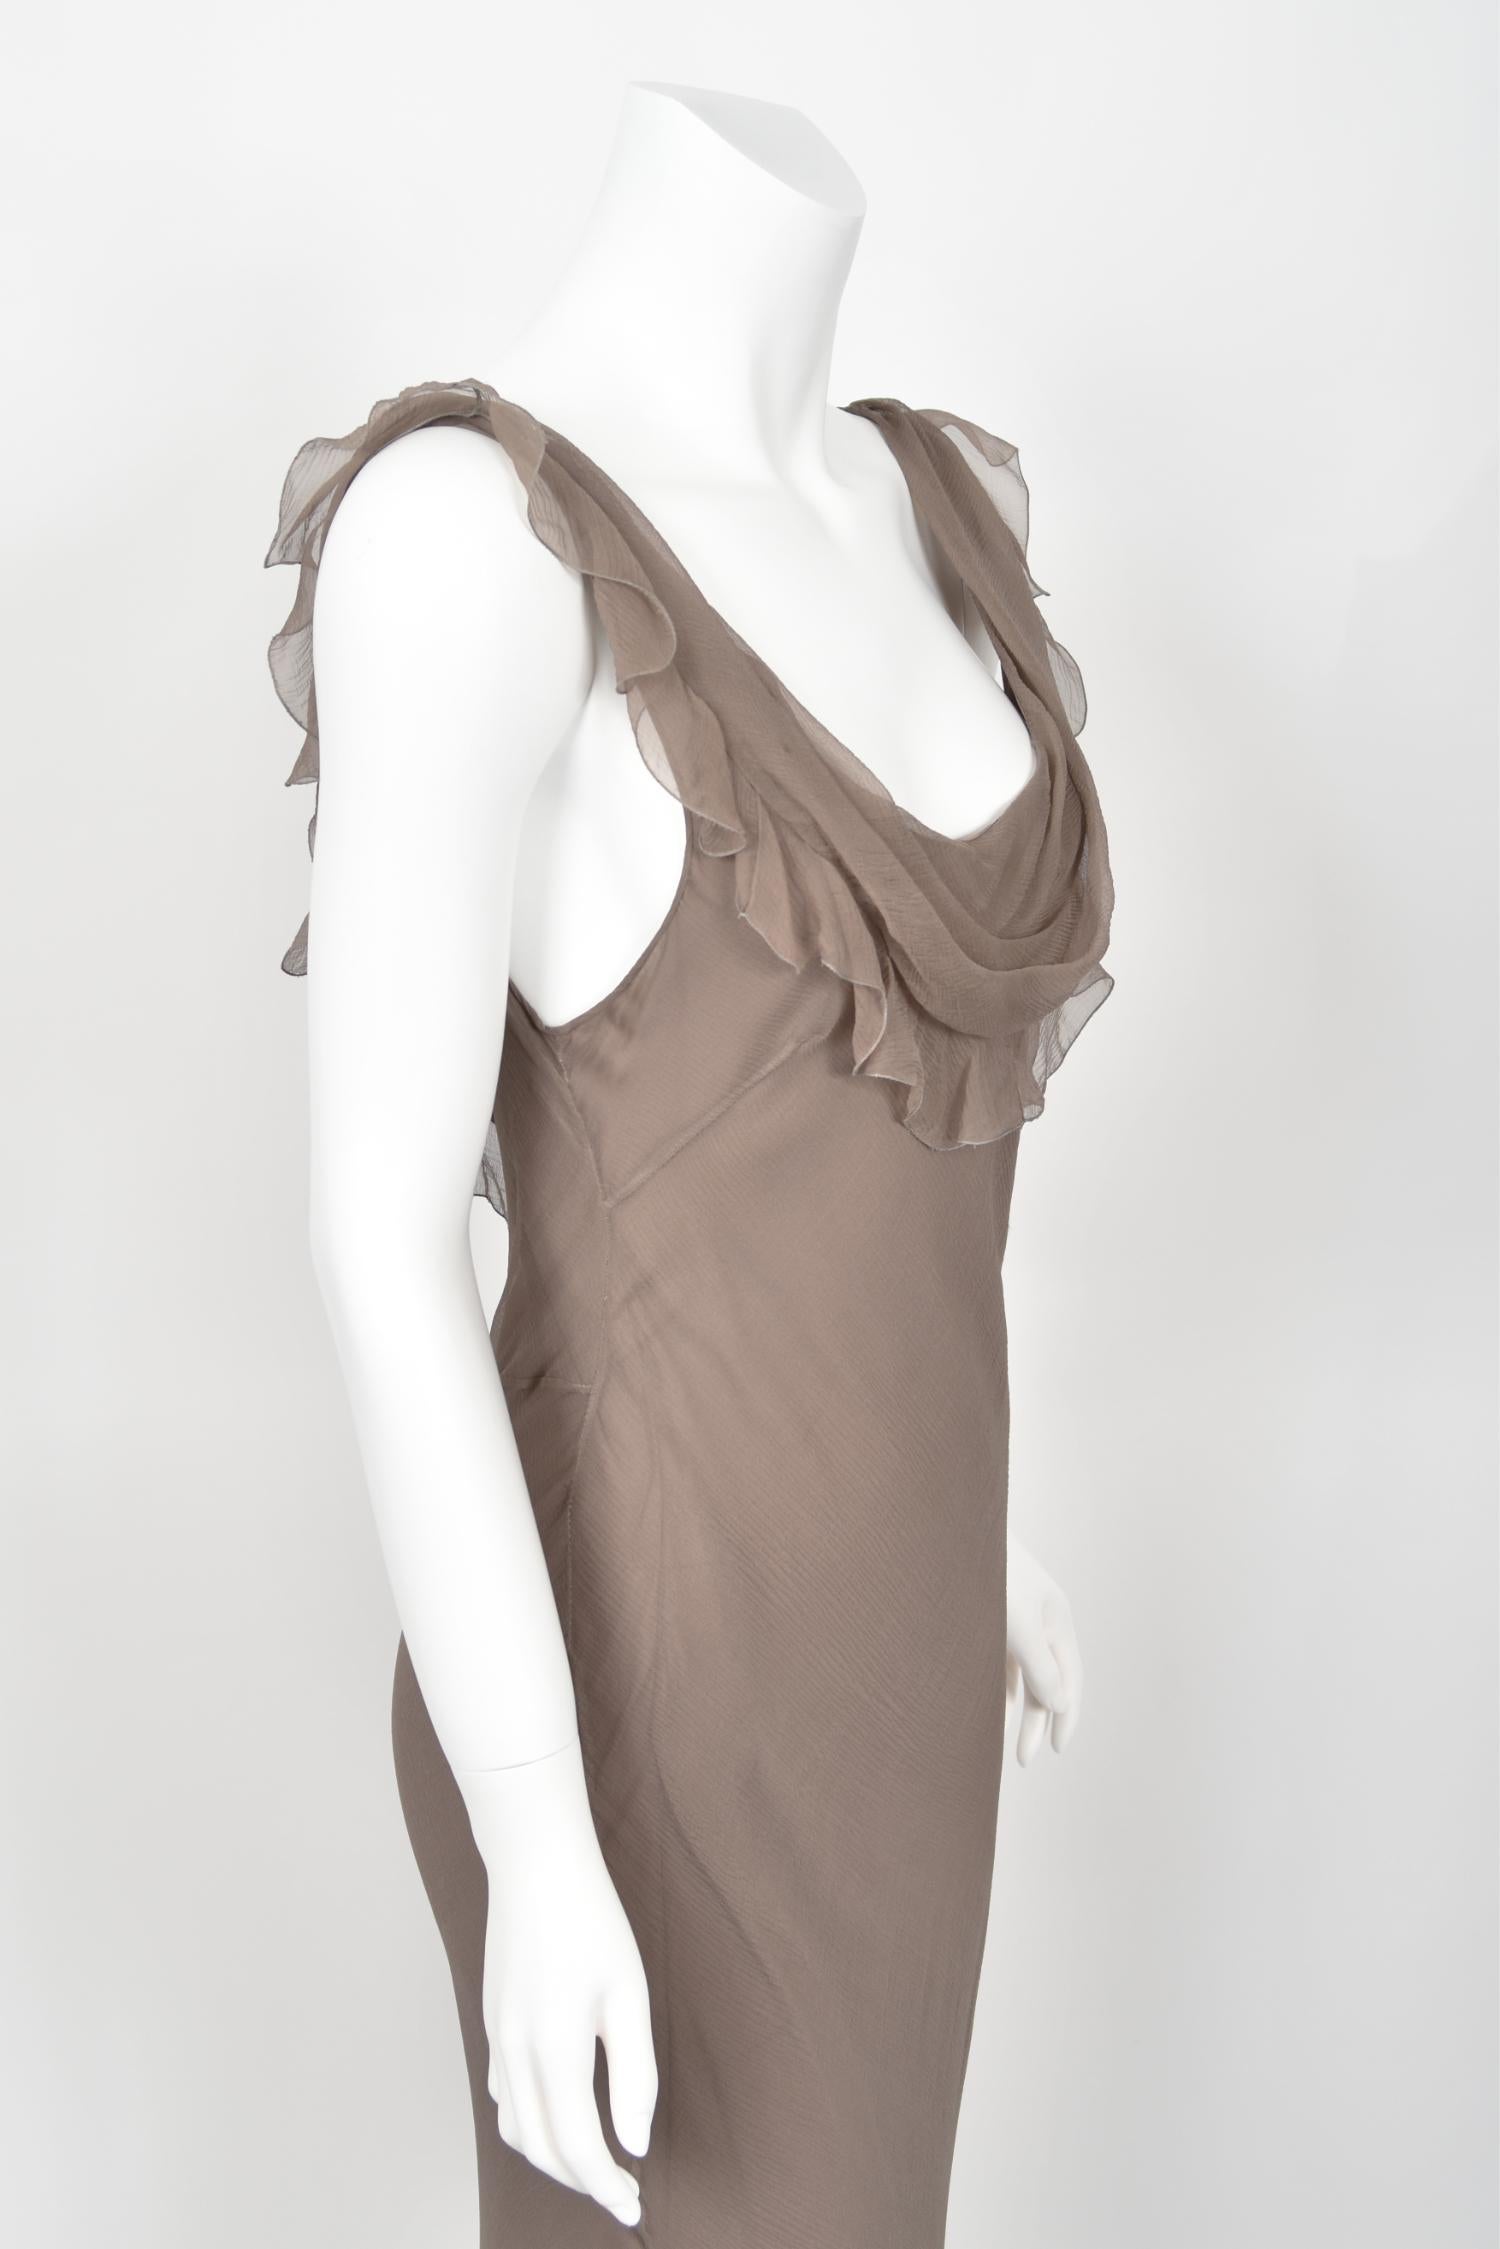 2006 Christian Dior by John Galliano Smoky Silk Tiered Ruffle Bias-Cut Gown For Sale 4